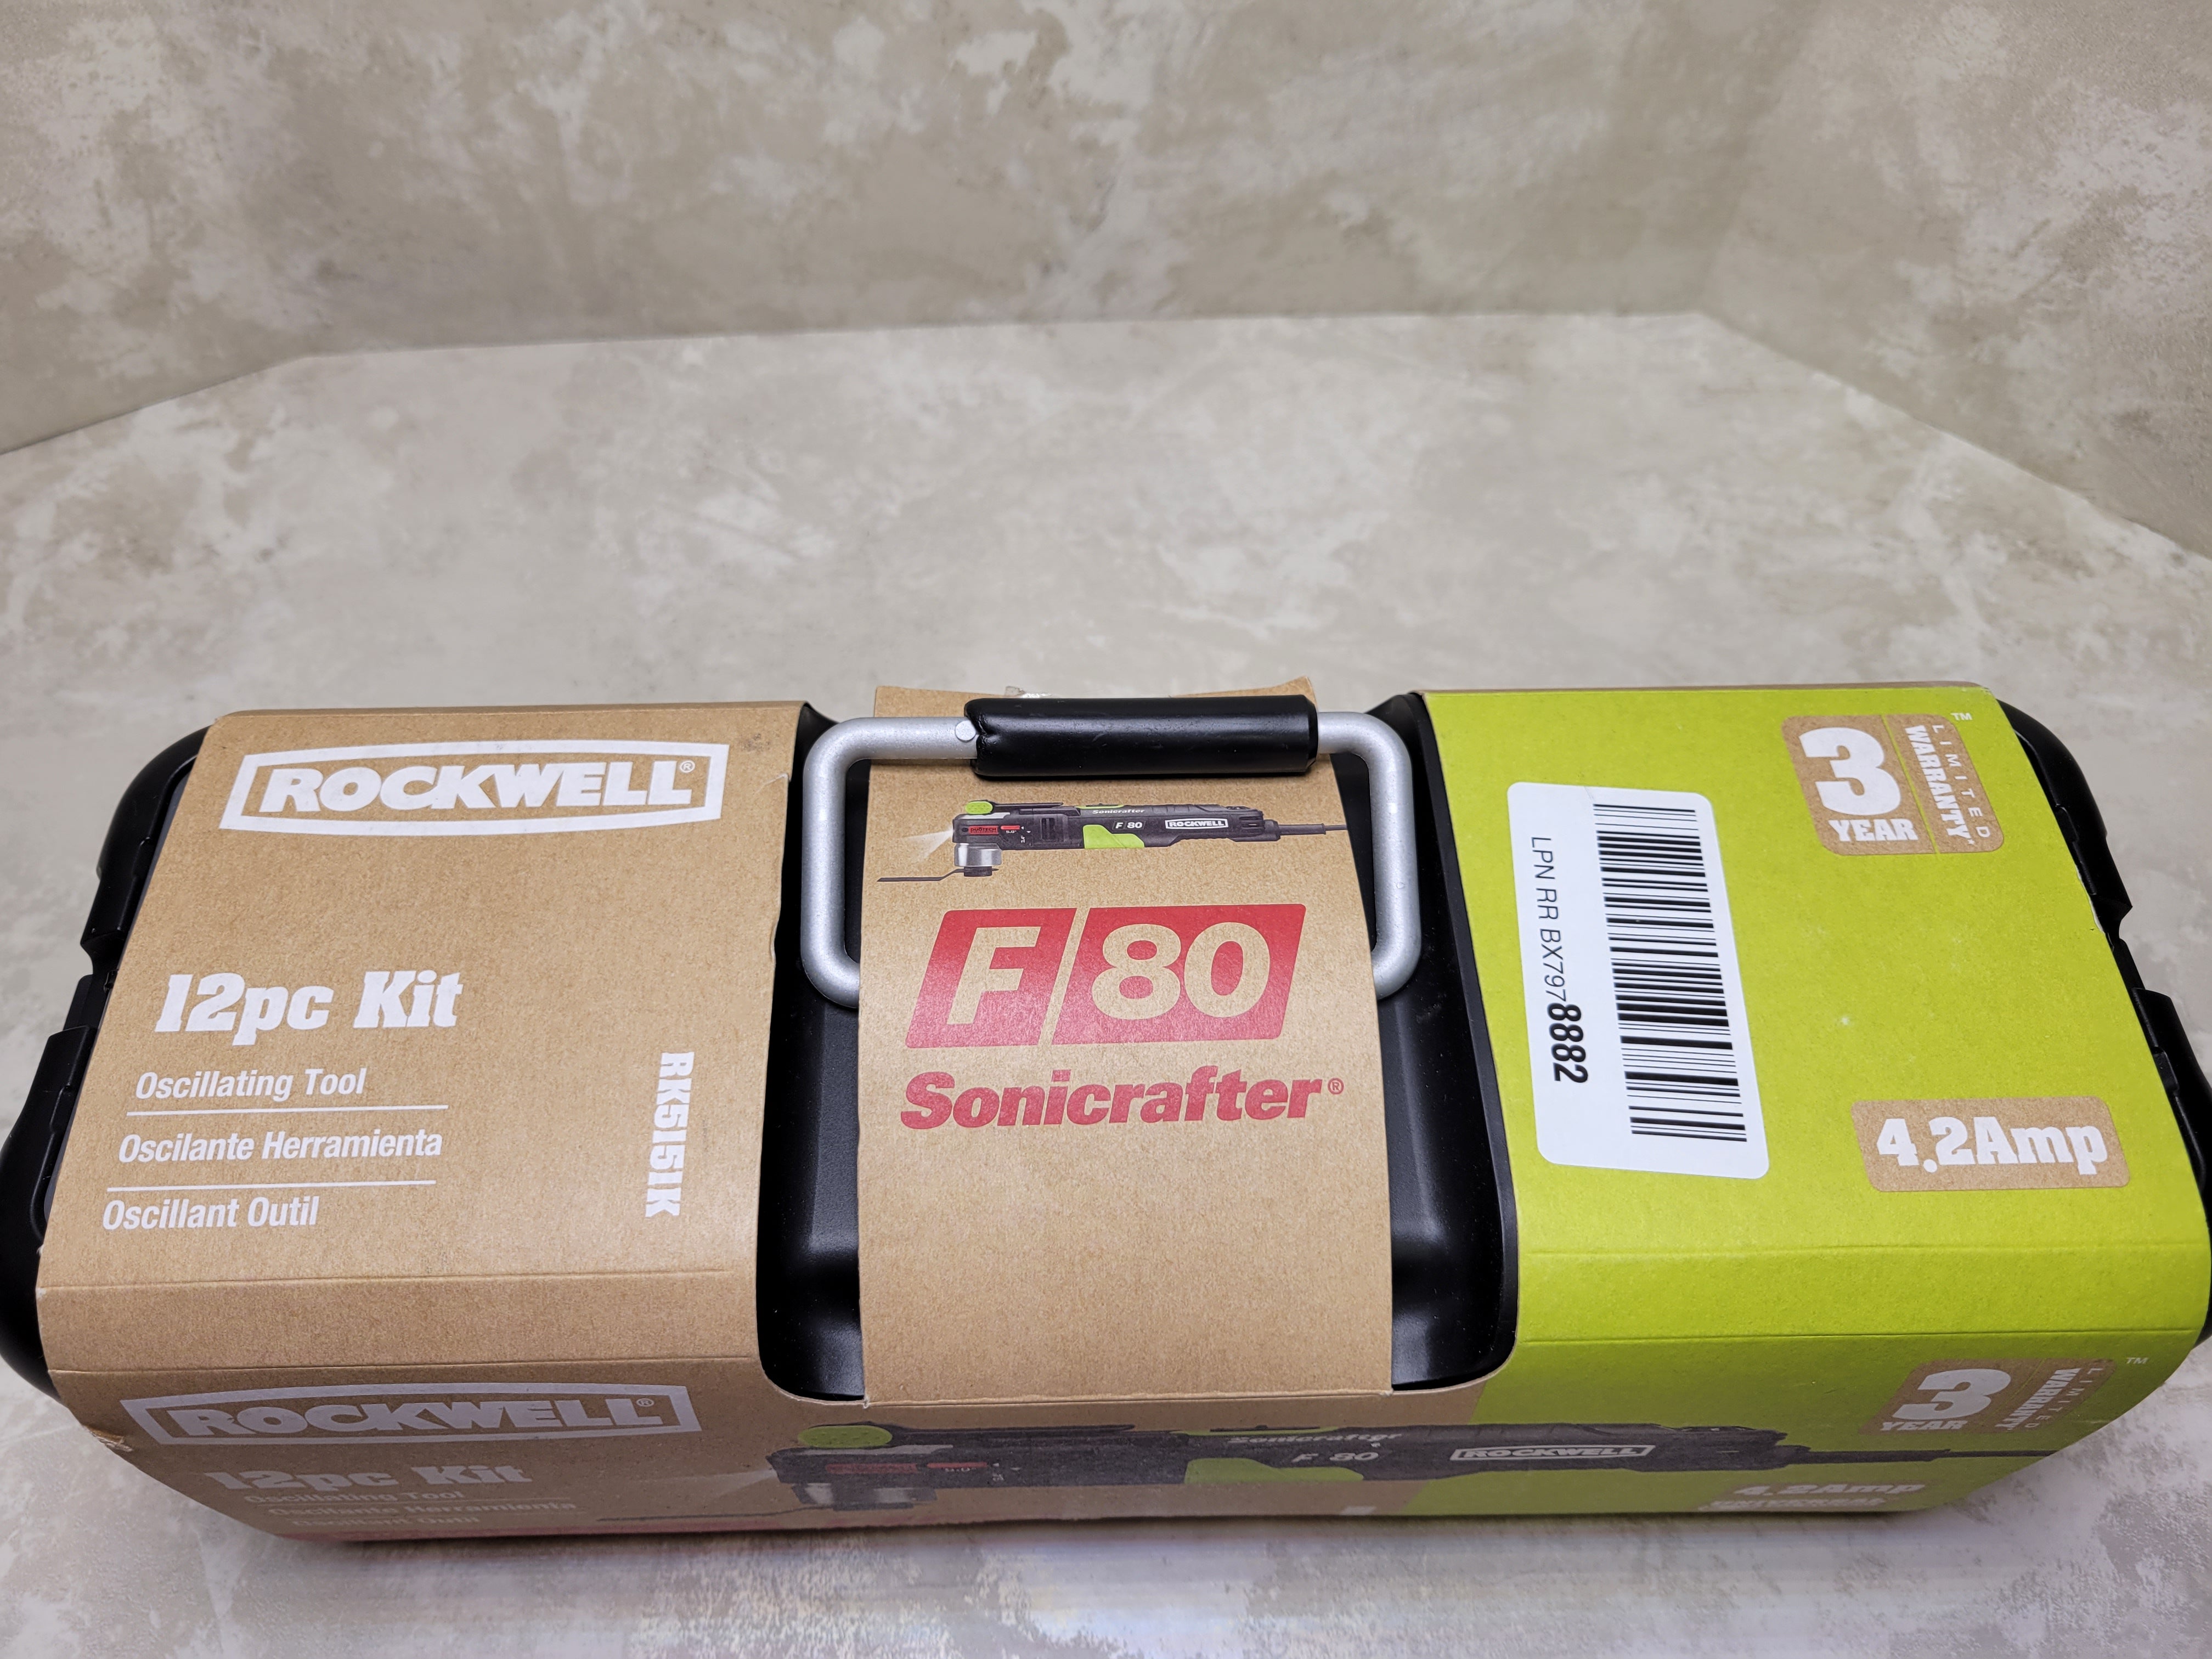 Rockwell RK5151K 4.2 Amp Sonicrafter F80 Oscillating Multi-Tool (7617190854894)